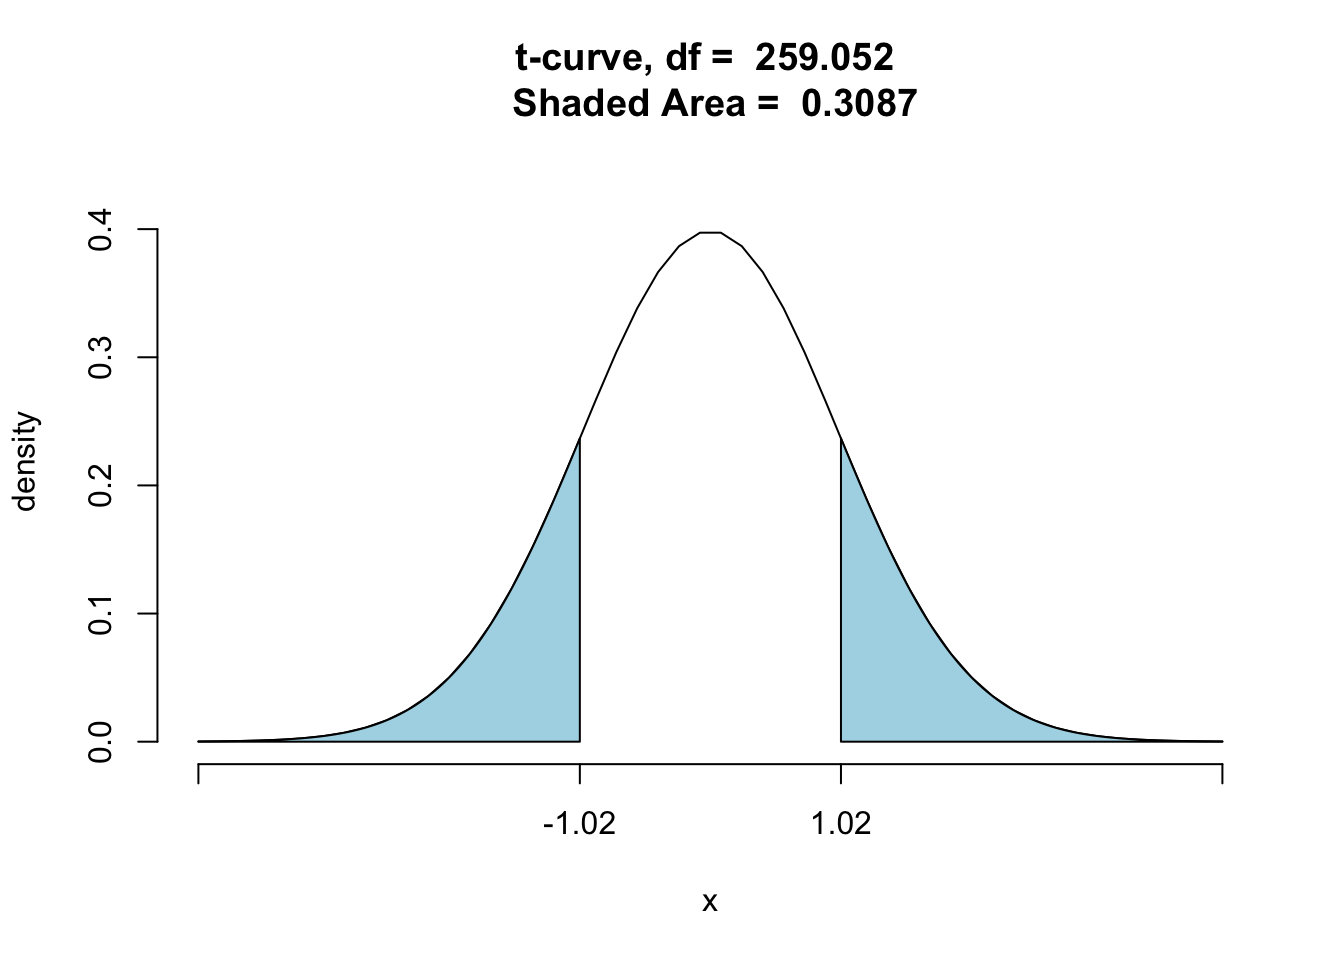 Two-Sided P-Value